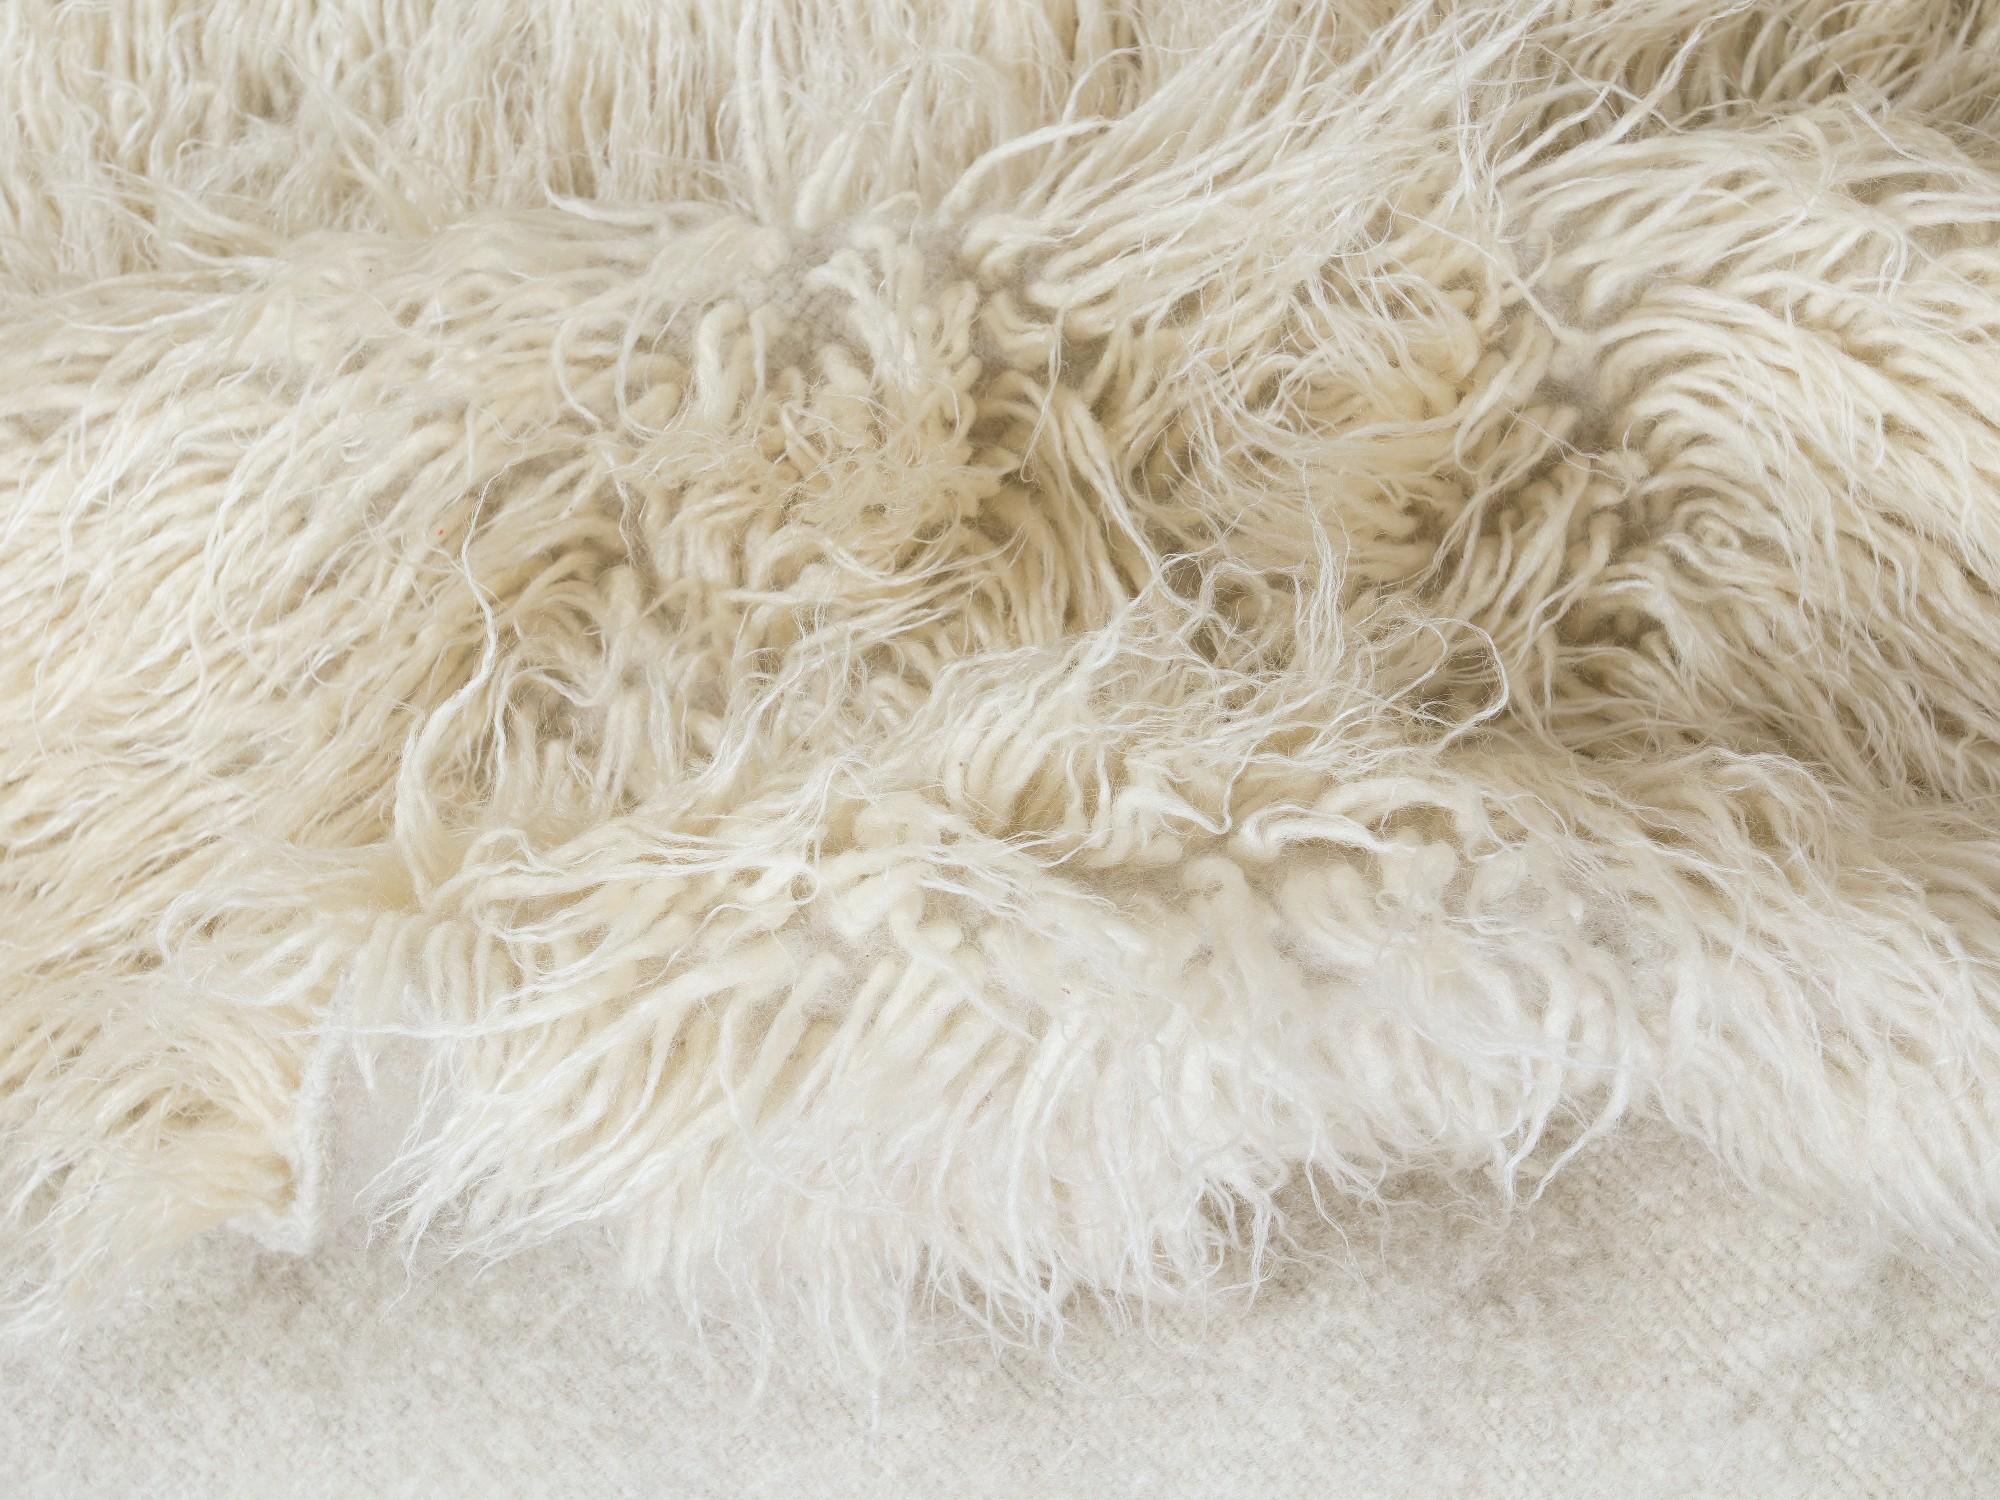 Hand-Knotted 3.8x5 Ft Handmade Shaggy Rug Made of Natural Mohair Wool. Vintage Turkish Carpet For Sale